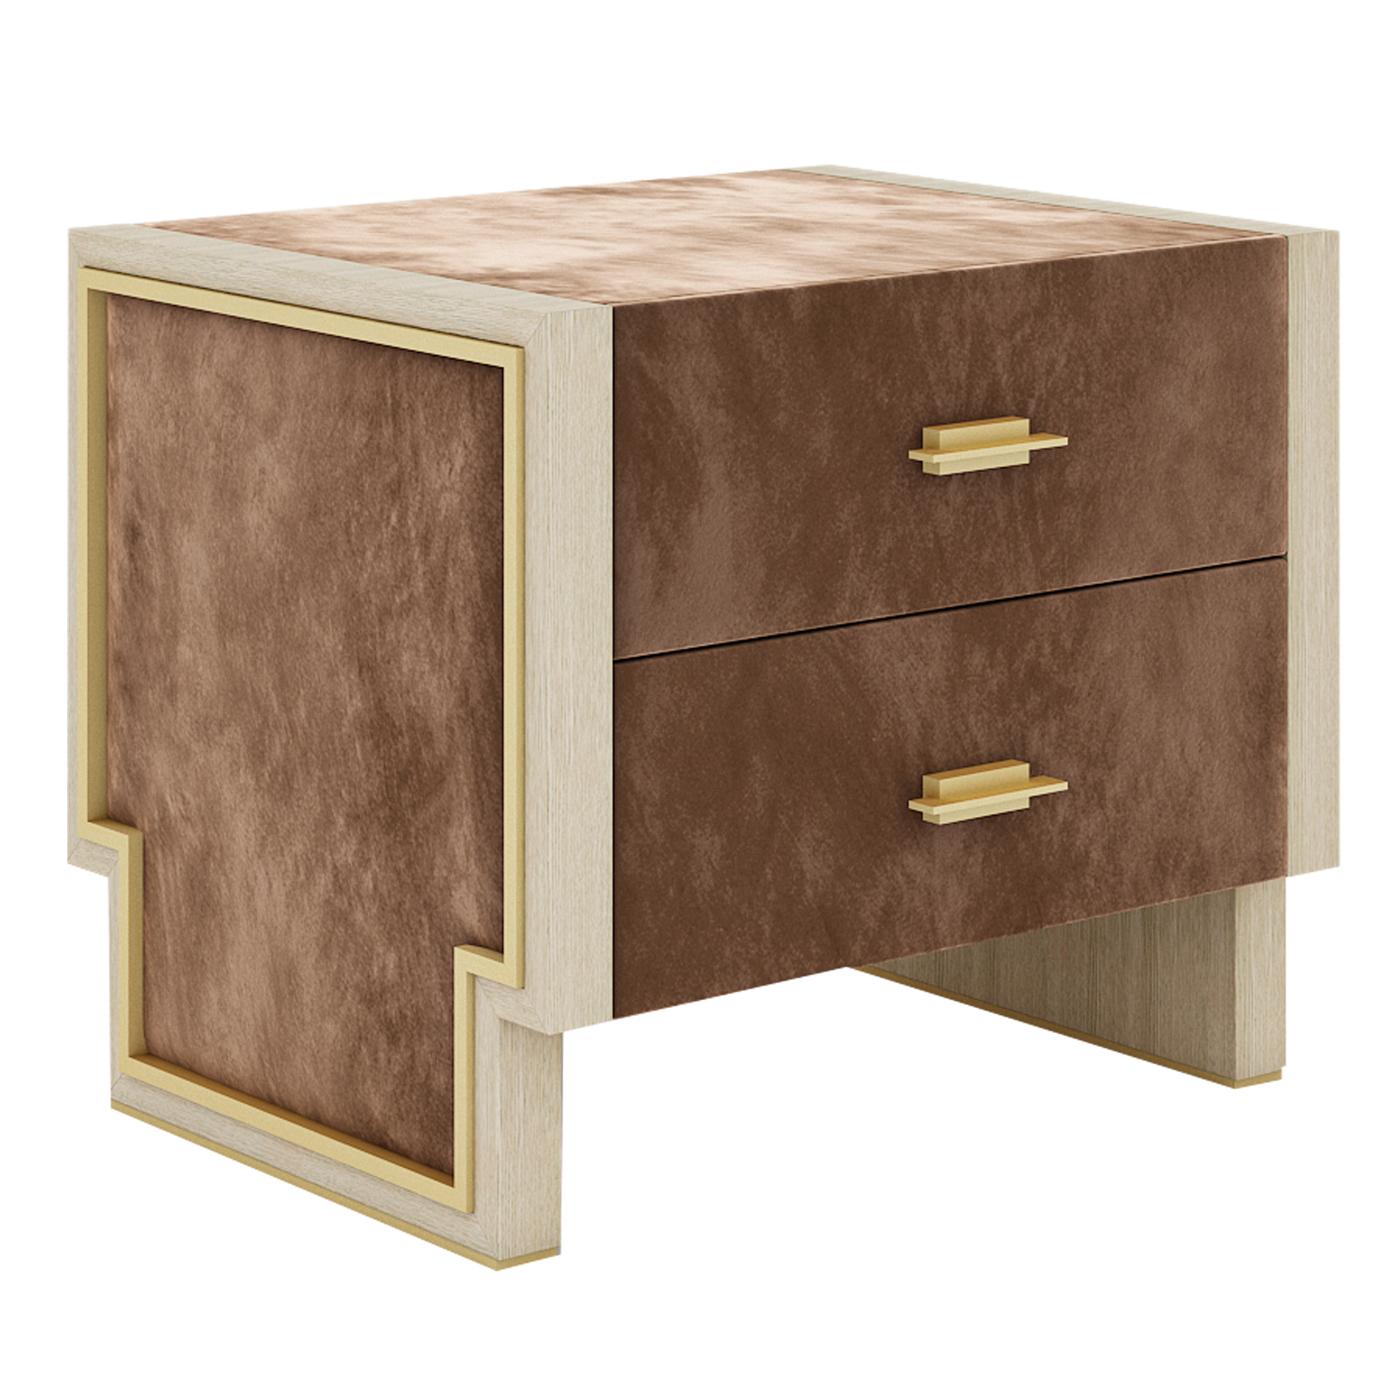 Perfect to suit a lavish and polished bedroom decor, this unique nightstand features a wooden structure covered in prized leather equipped with two drawers. The profile of this piece boasts a T-shape framed by a brass-finished metal detail and